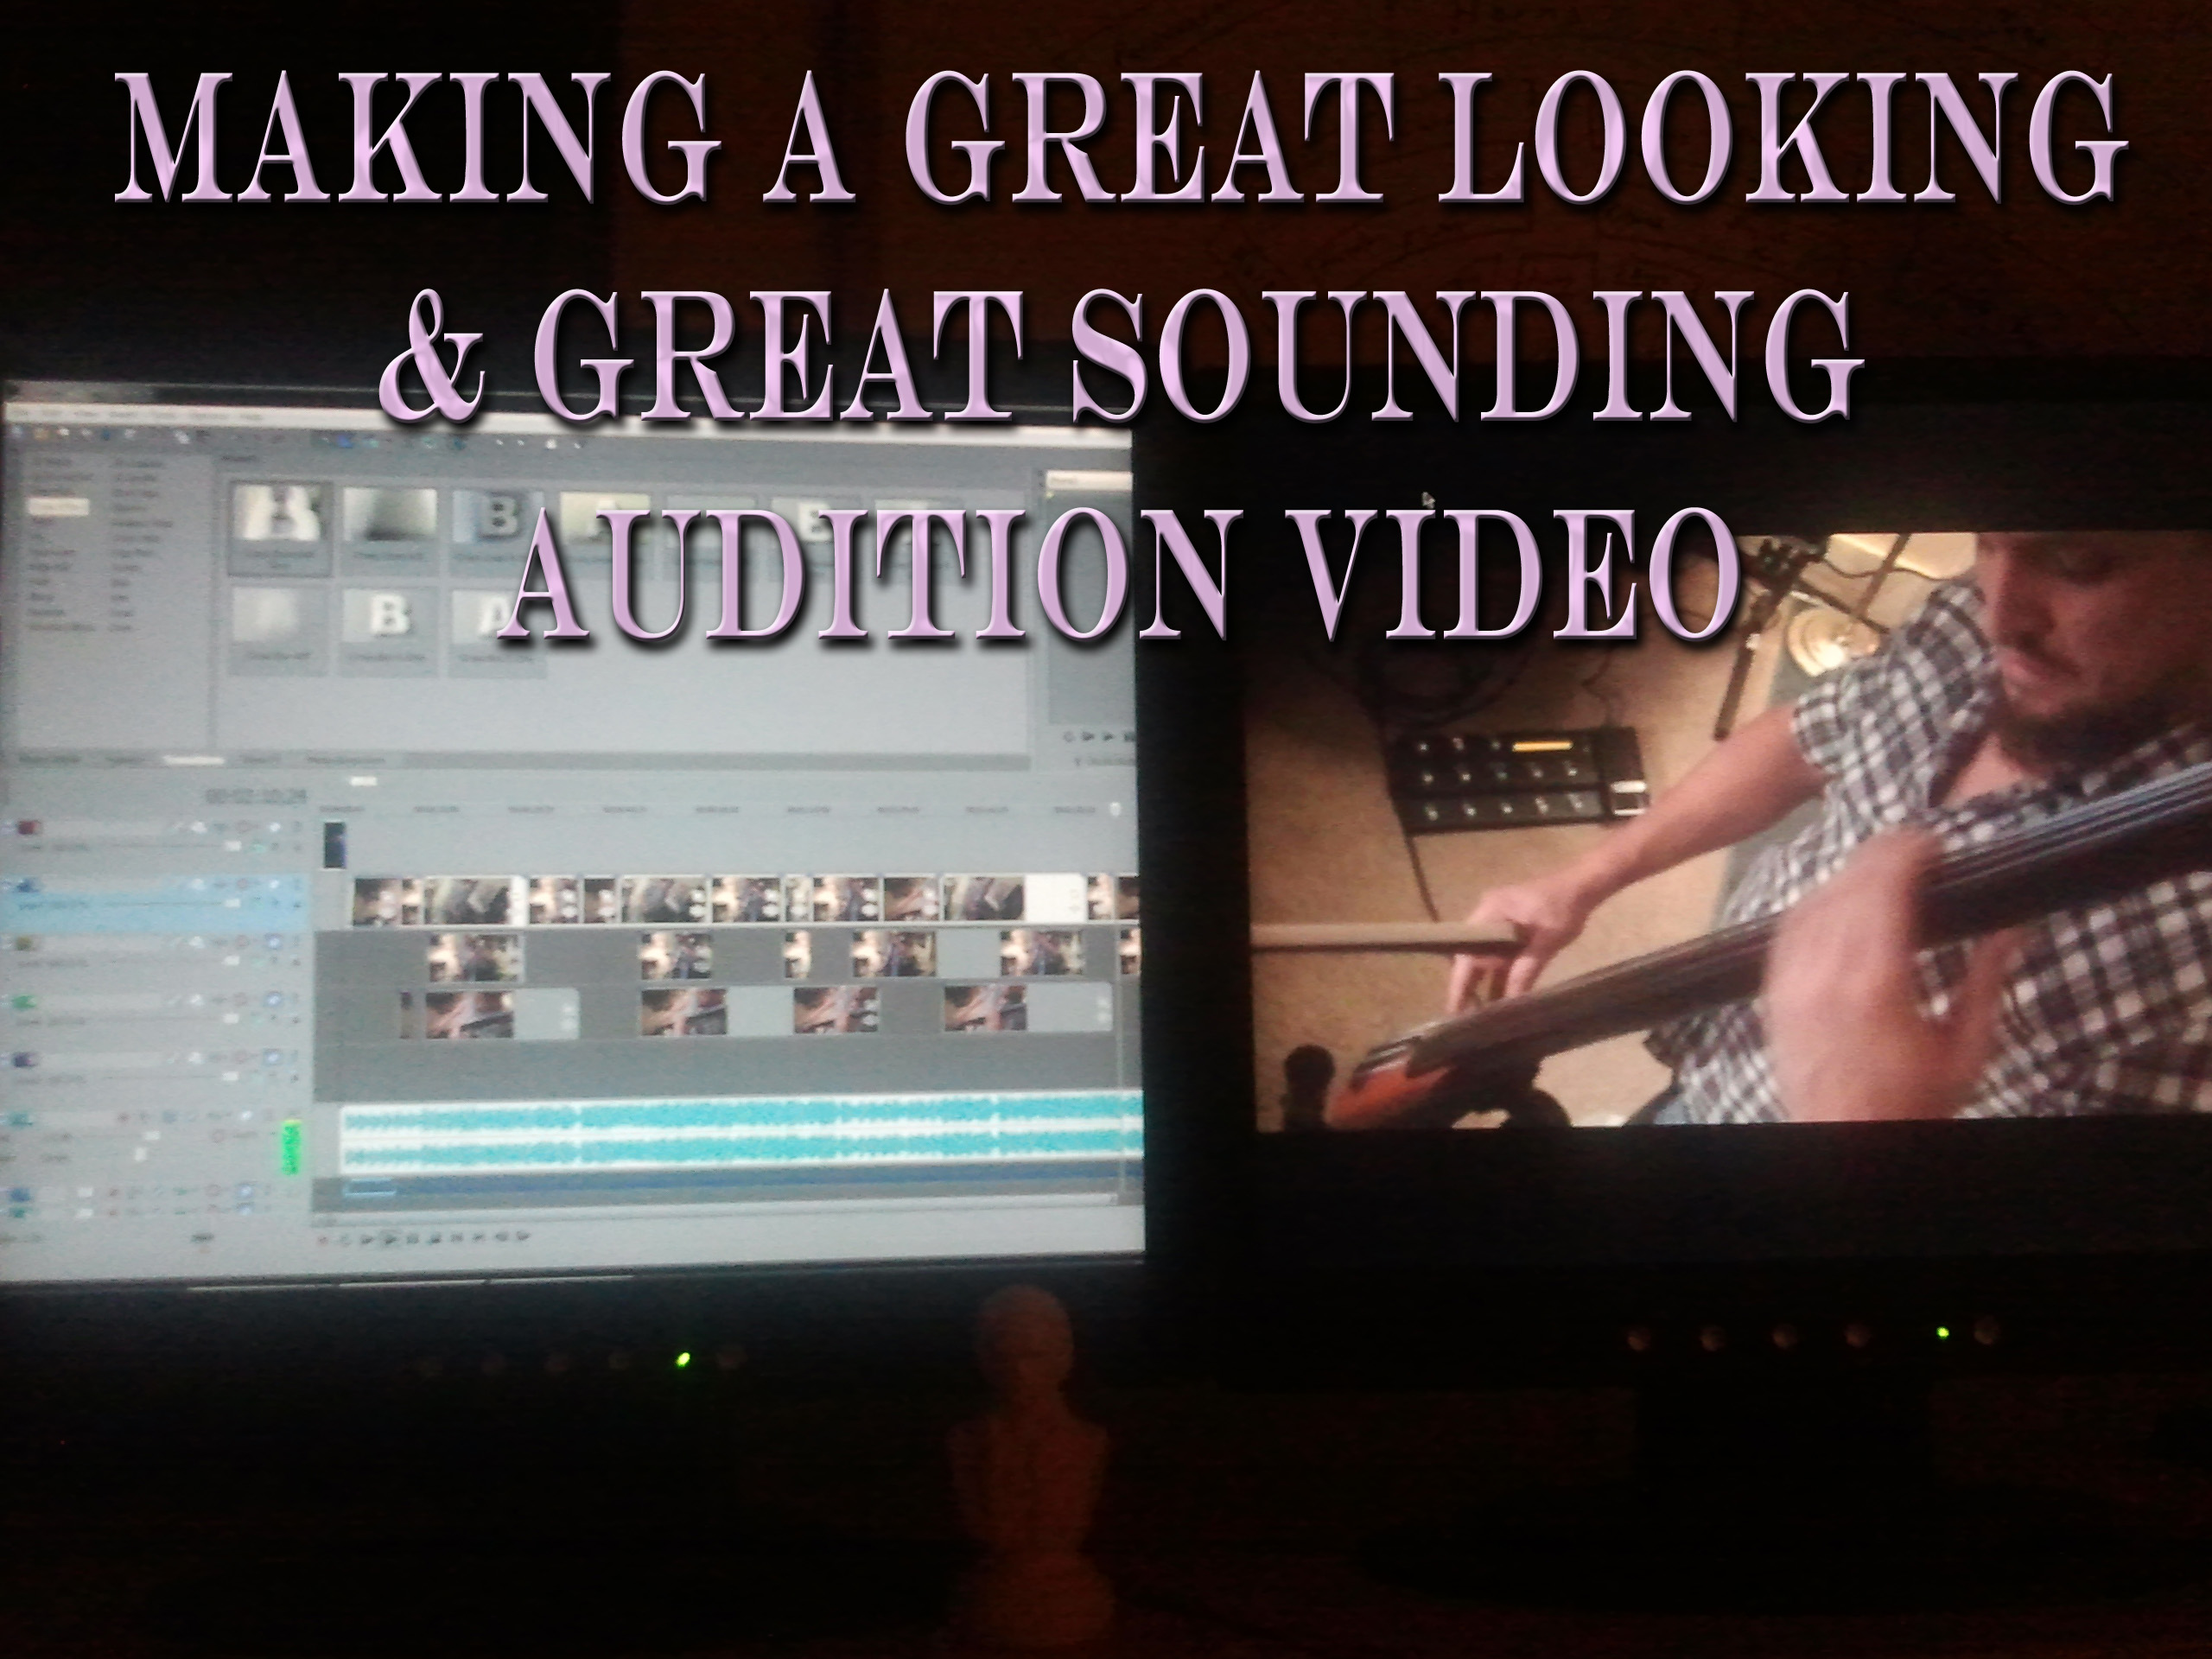 How to make a great looking and great sounding audition video